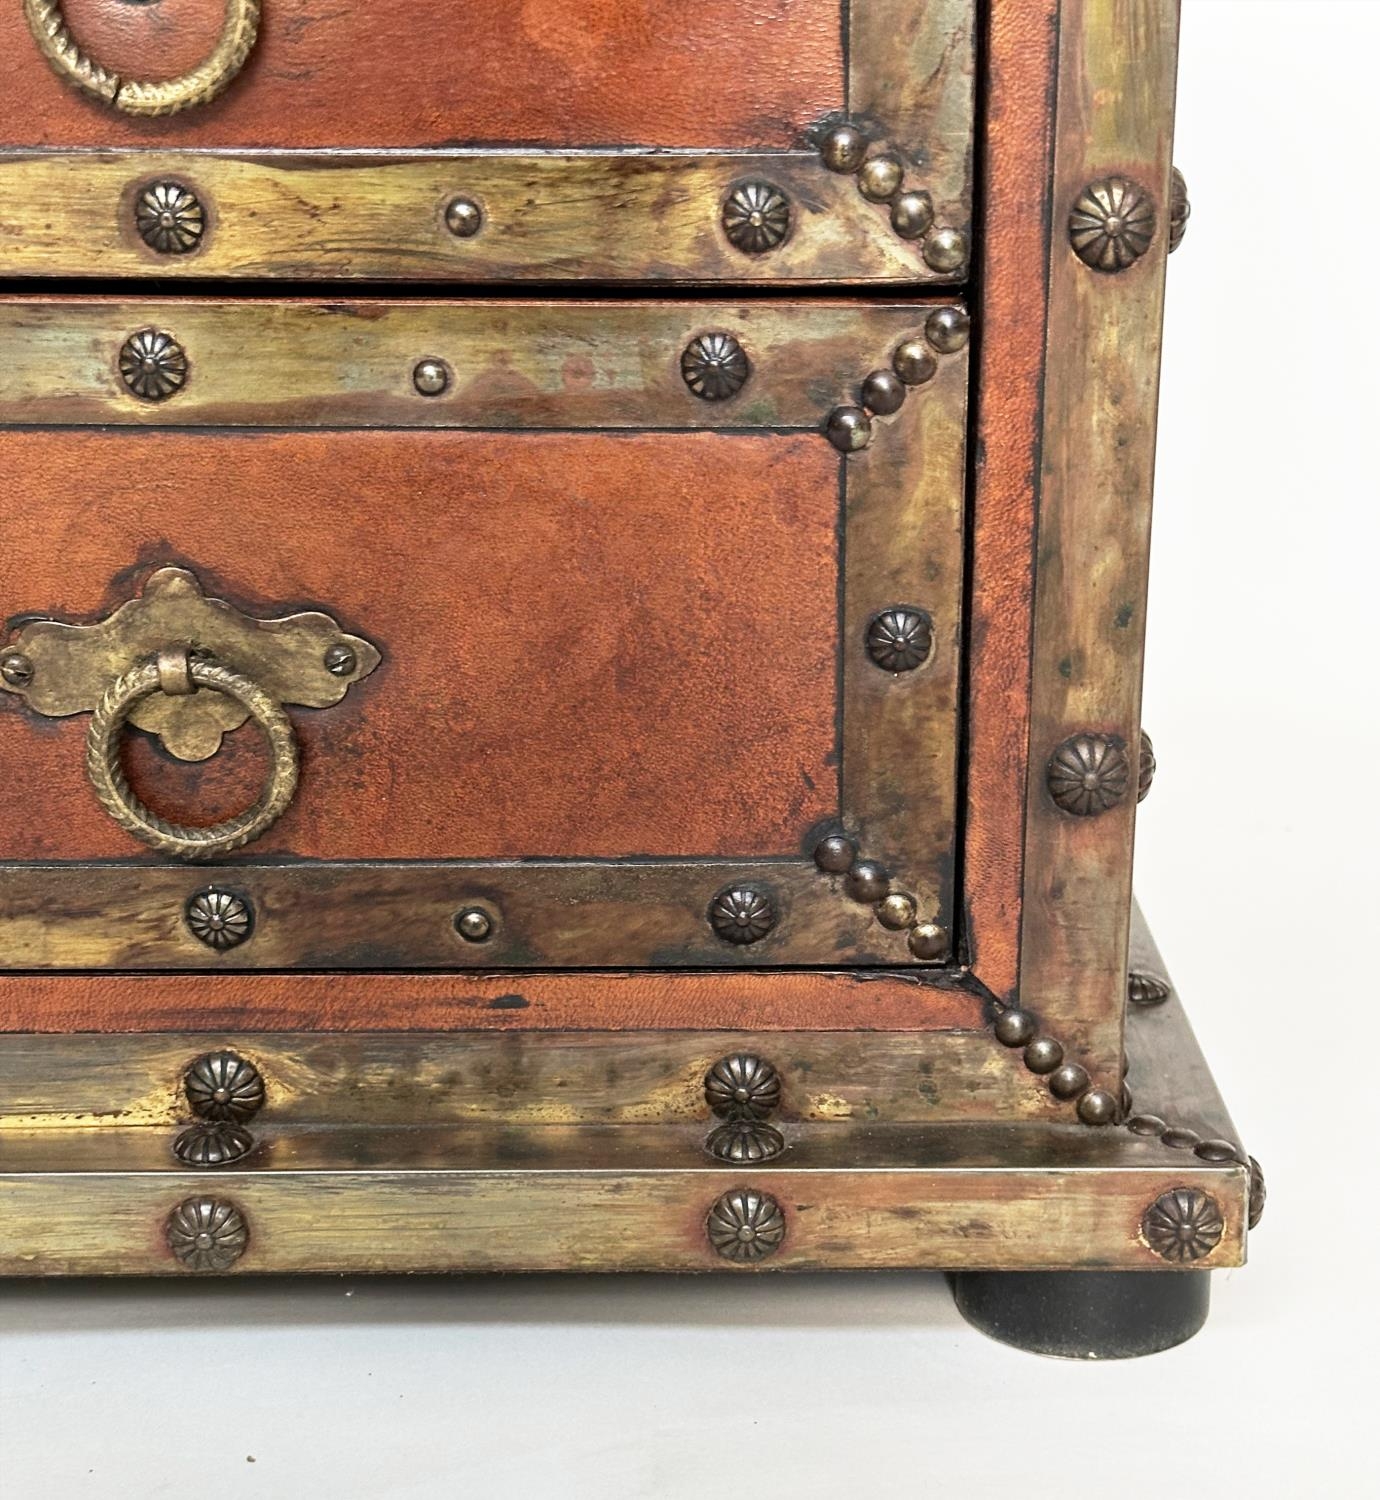 SPANISH STYLE CHEST, vintage leather and brass bound with three drawers and carrying handles, 95cm W - Image 6 of 16